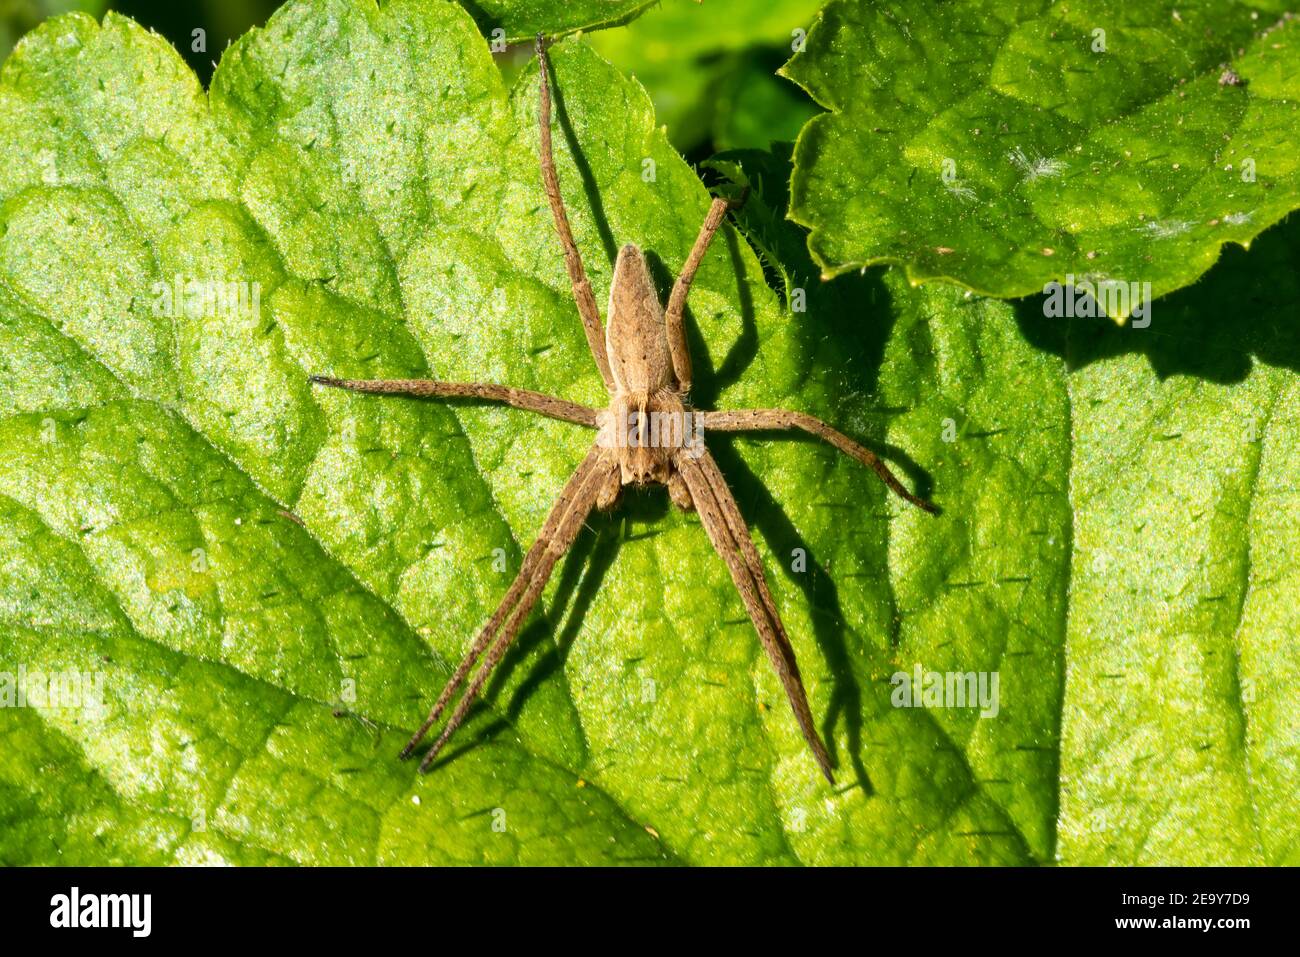 Nursery web spider (Pisaurina mira) a common garden and meadow insect stock photo Stock Photo